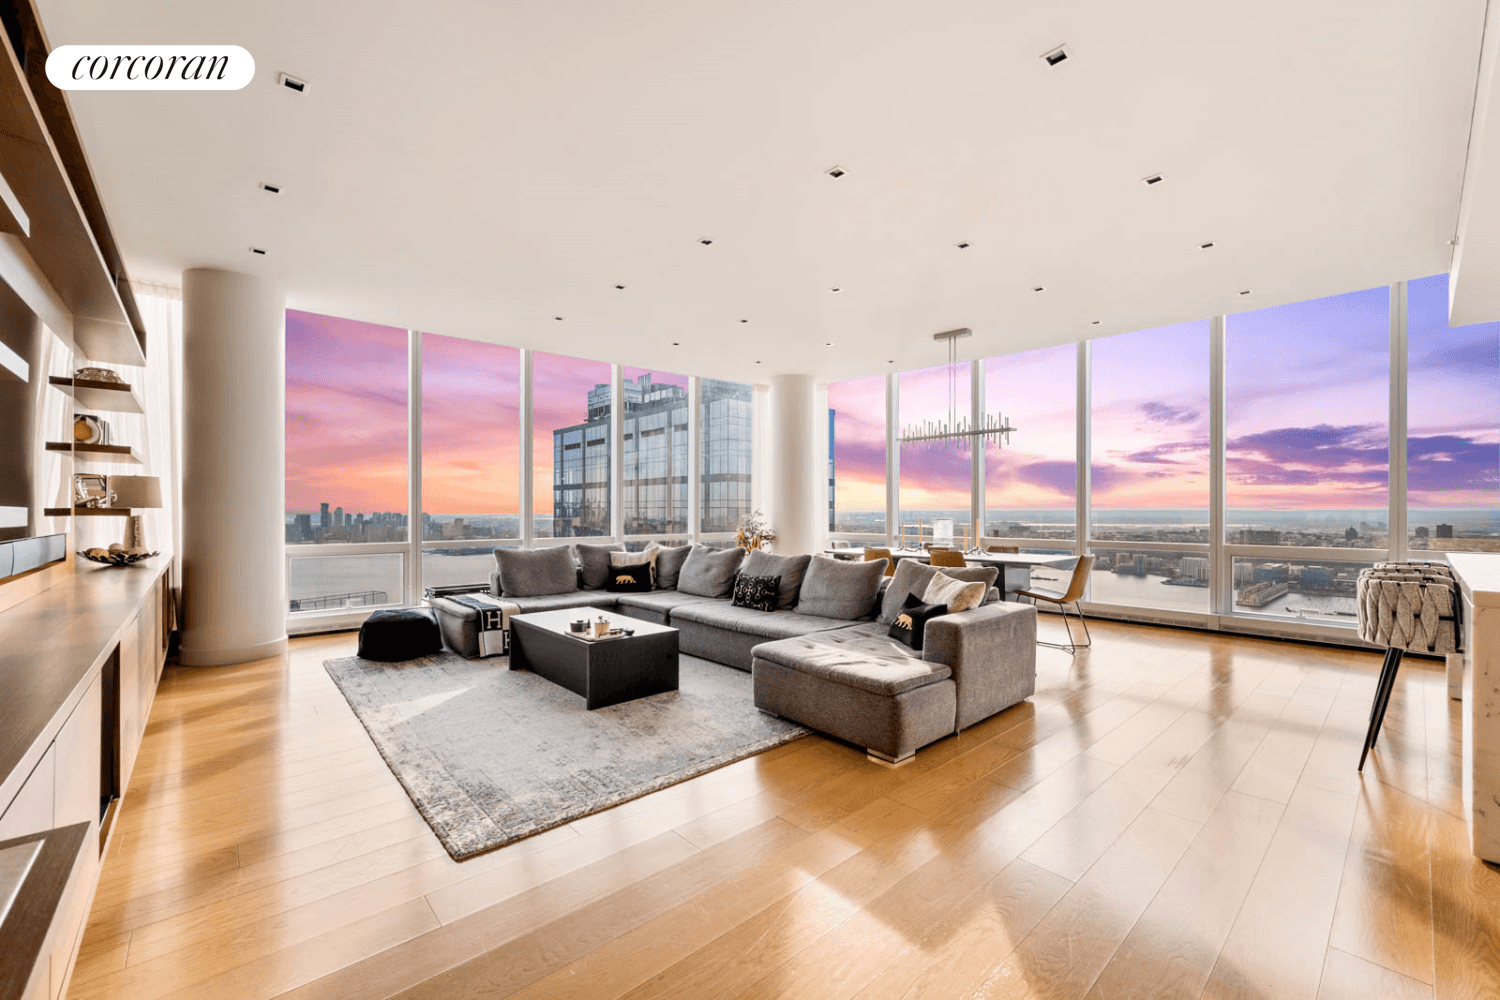 Masterfully designed trophy 2 bedroom, 2314sqft residence with 11 foot ceilings, sweeping Hudson River and jetliner downtown views.